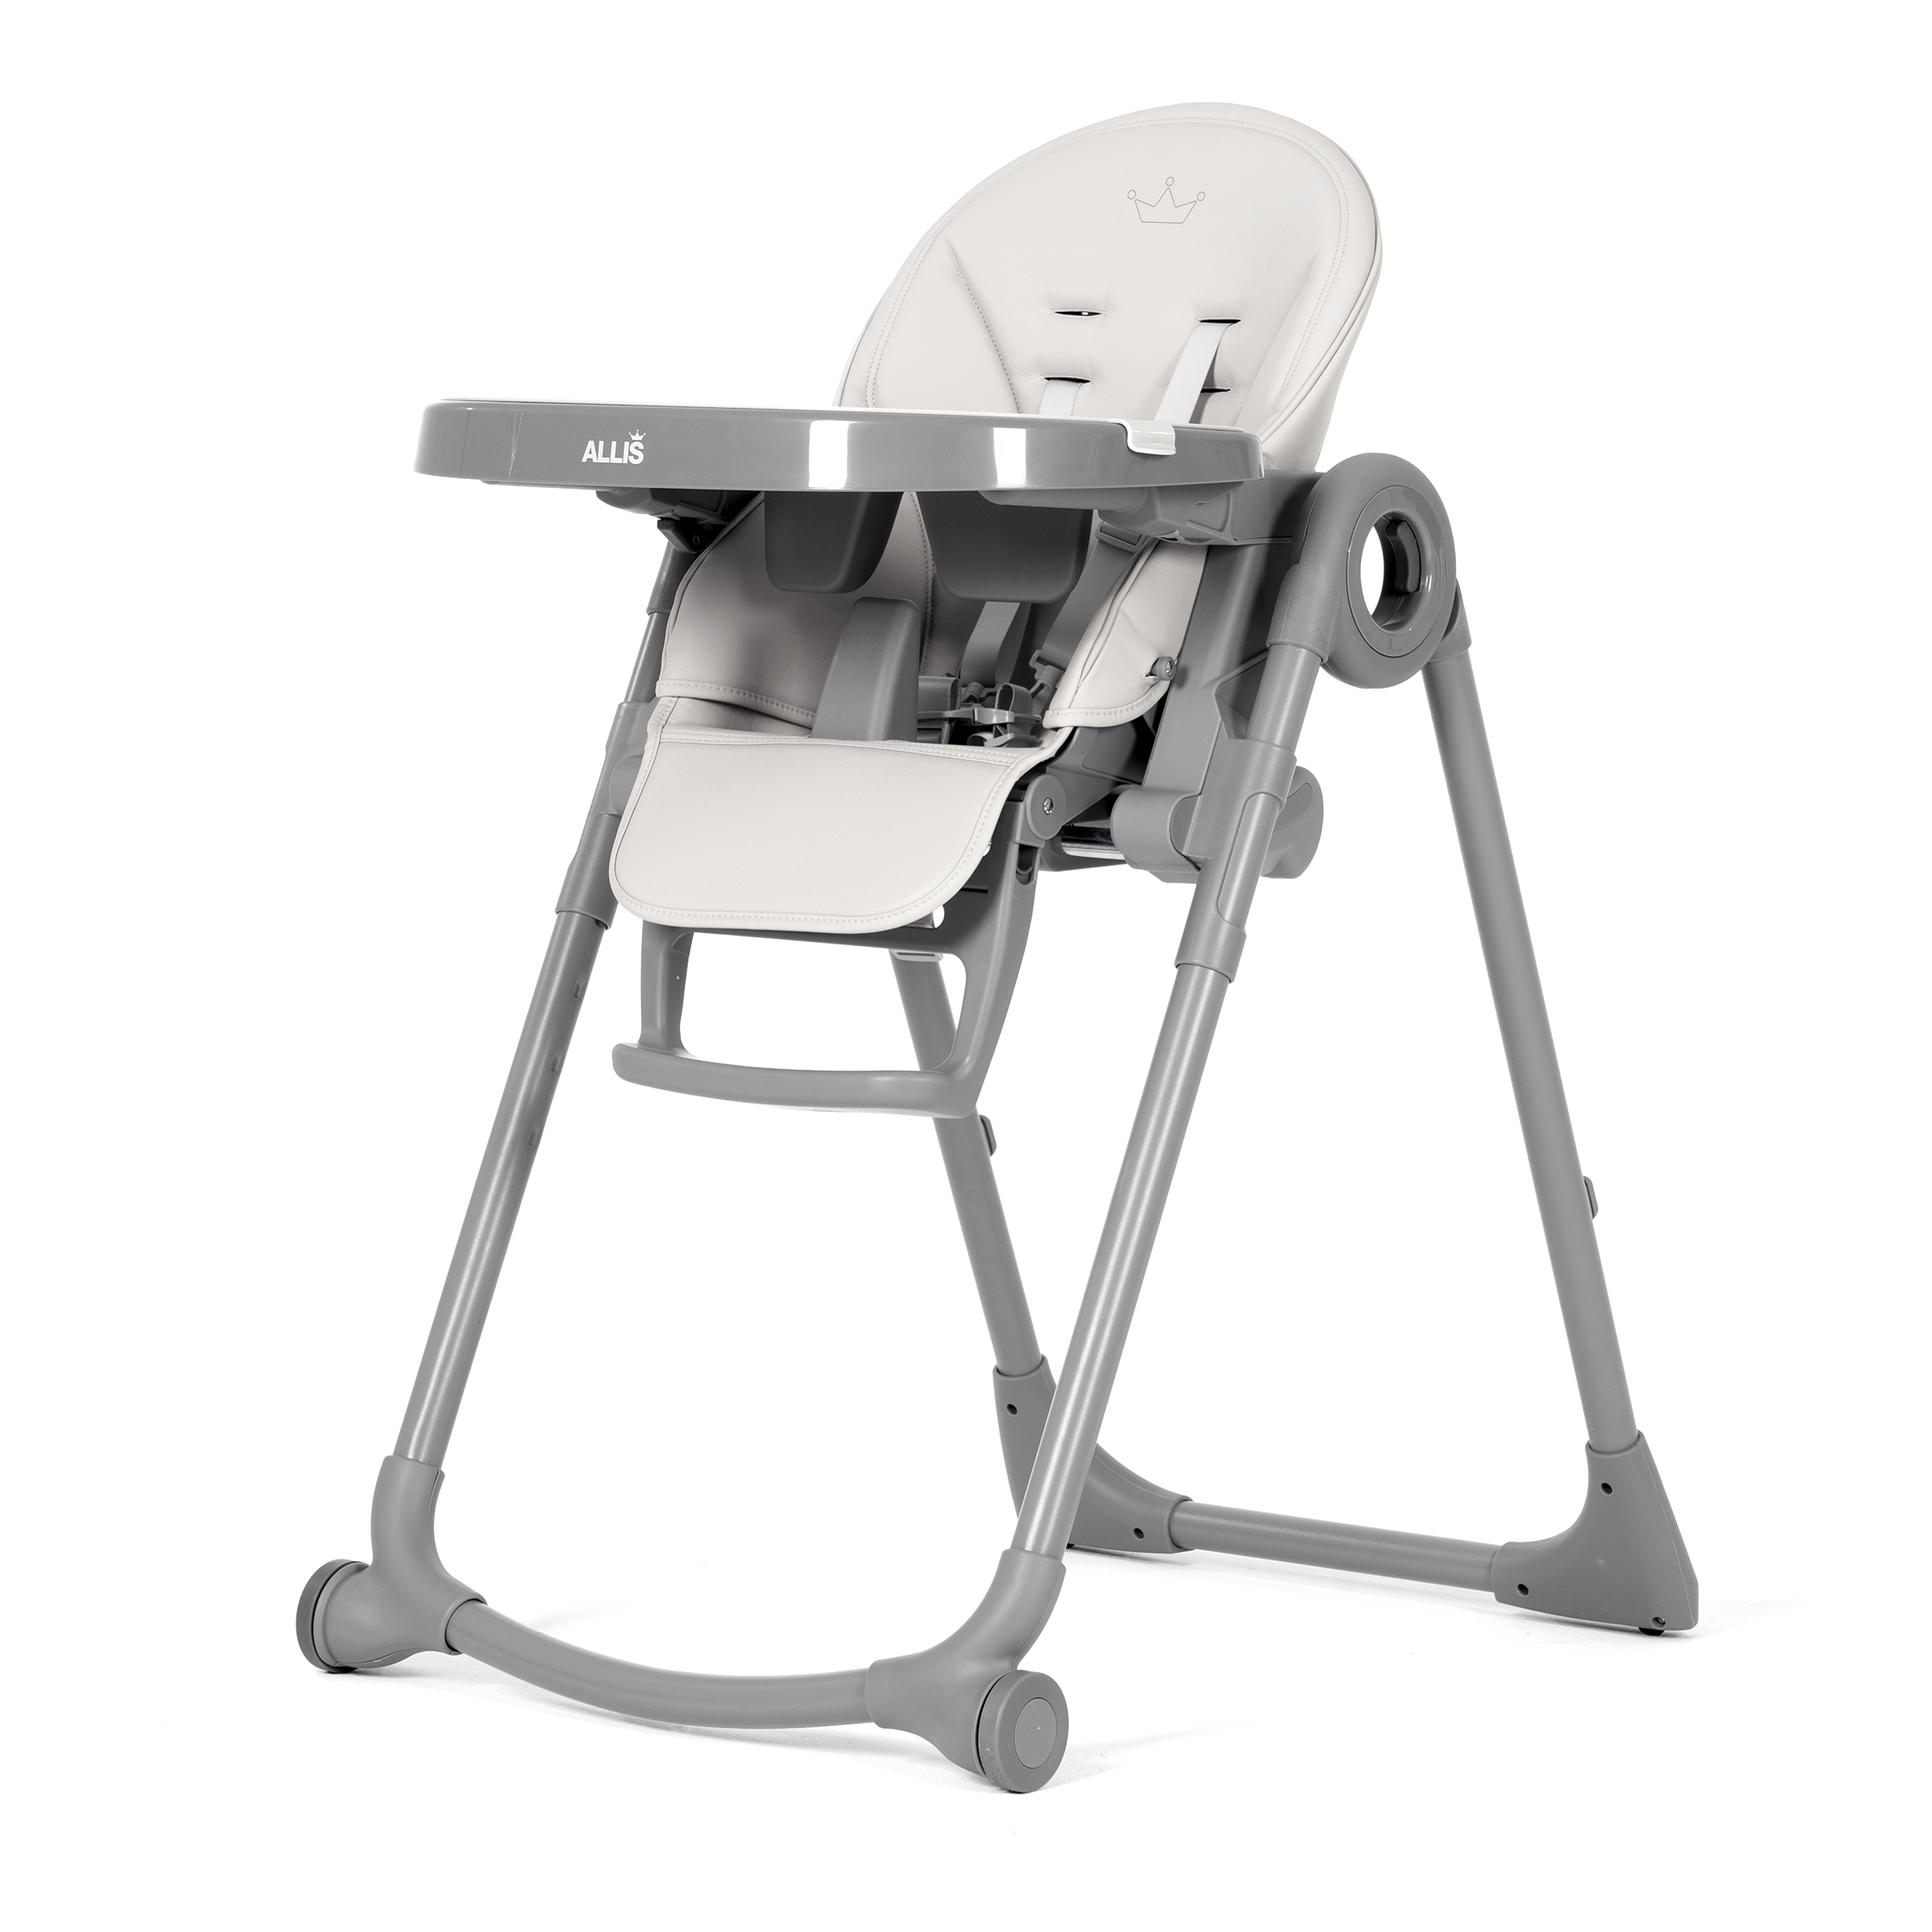 Versatile baby high chair with recline and adjustable height